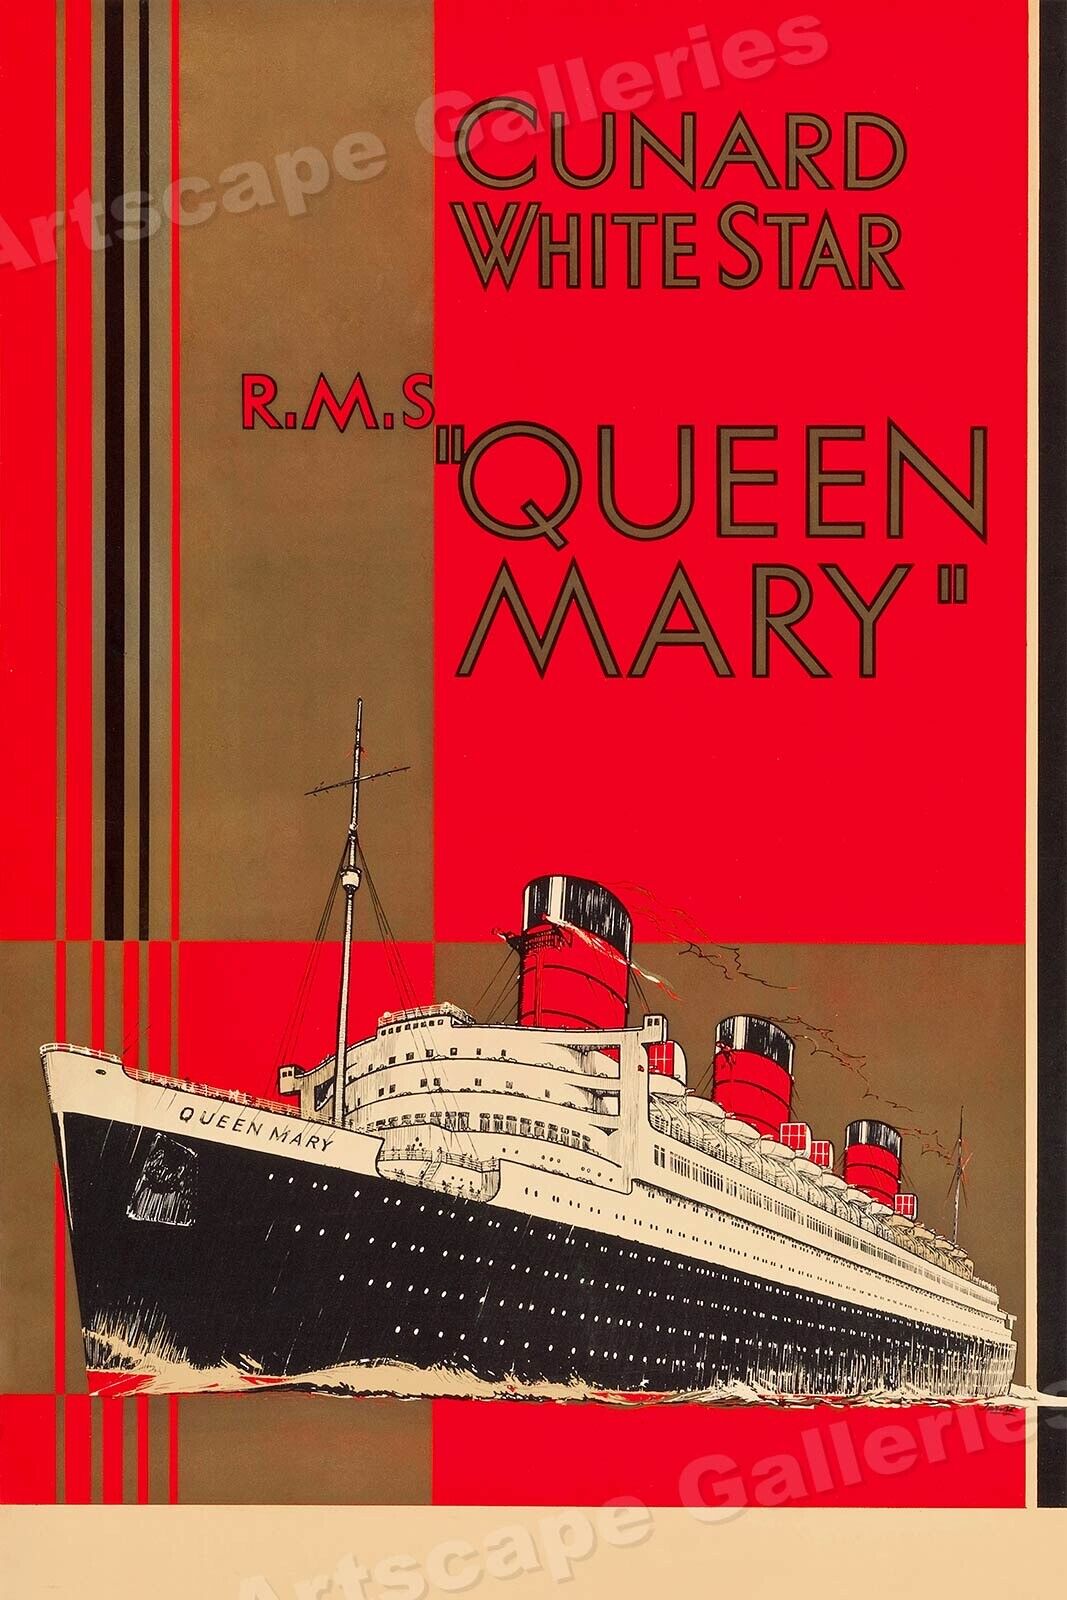 1936 Cunard Line White Star Queen Mary Vintage Style Travel Poster - 20x30